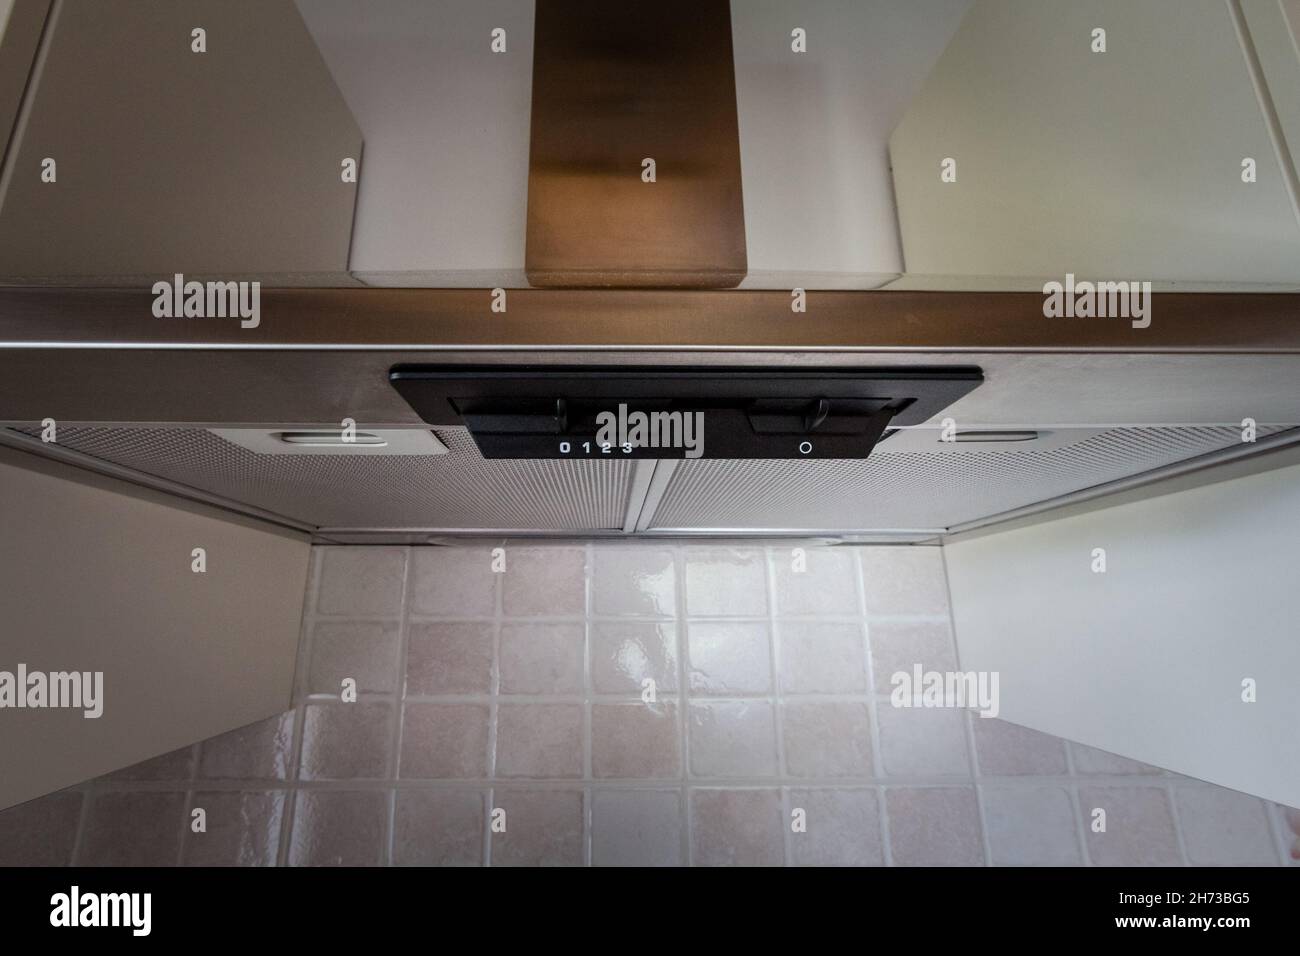 Picture of a consumer grad kitchen hood. A kitchen hood, exhaust hood, or range hood is a device containing a mechanical fan that hangs above the stov Stock Photo